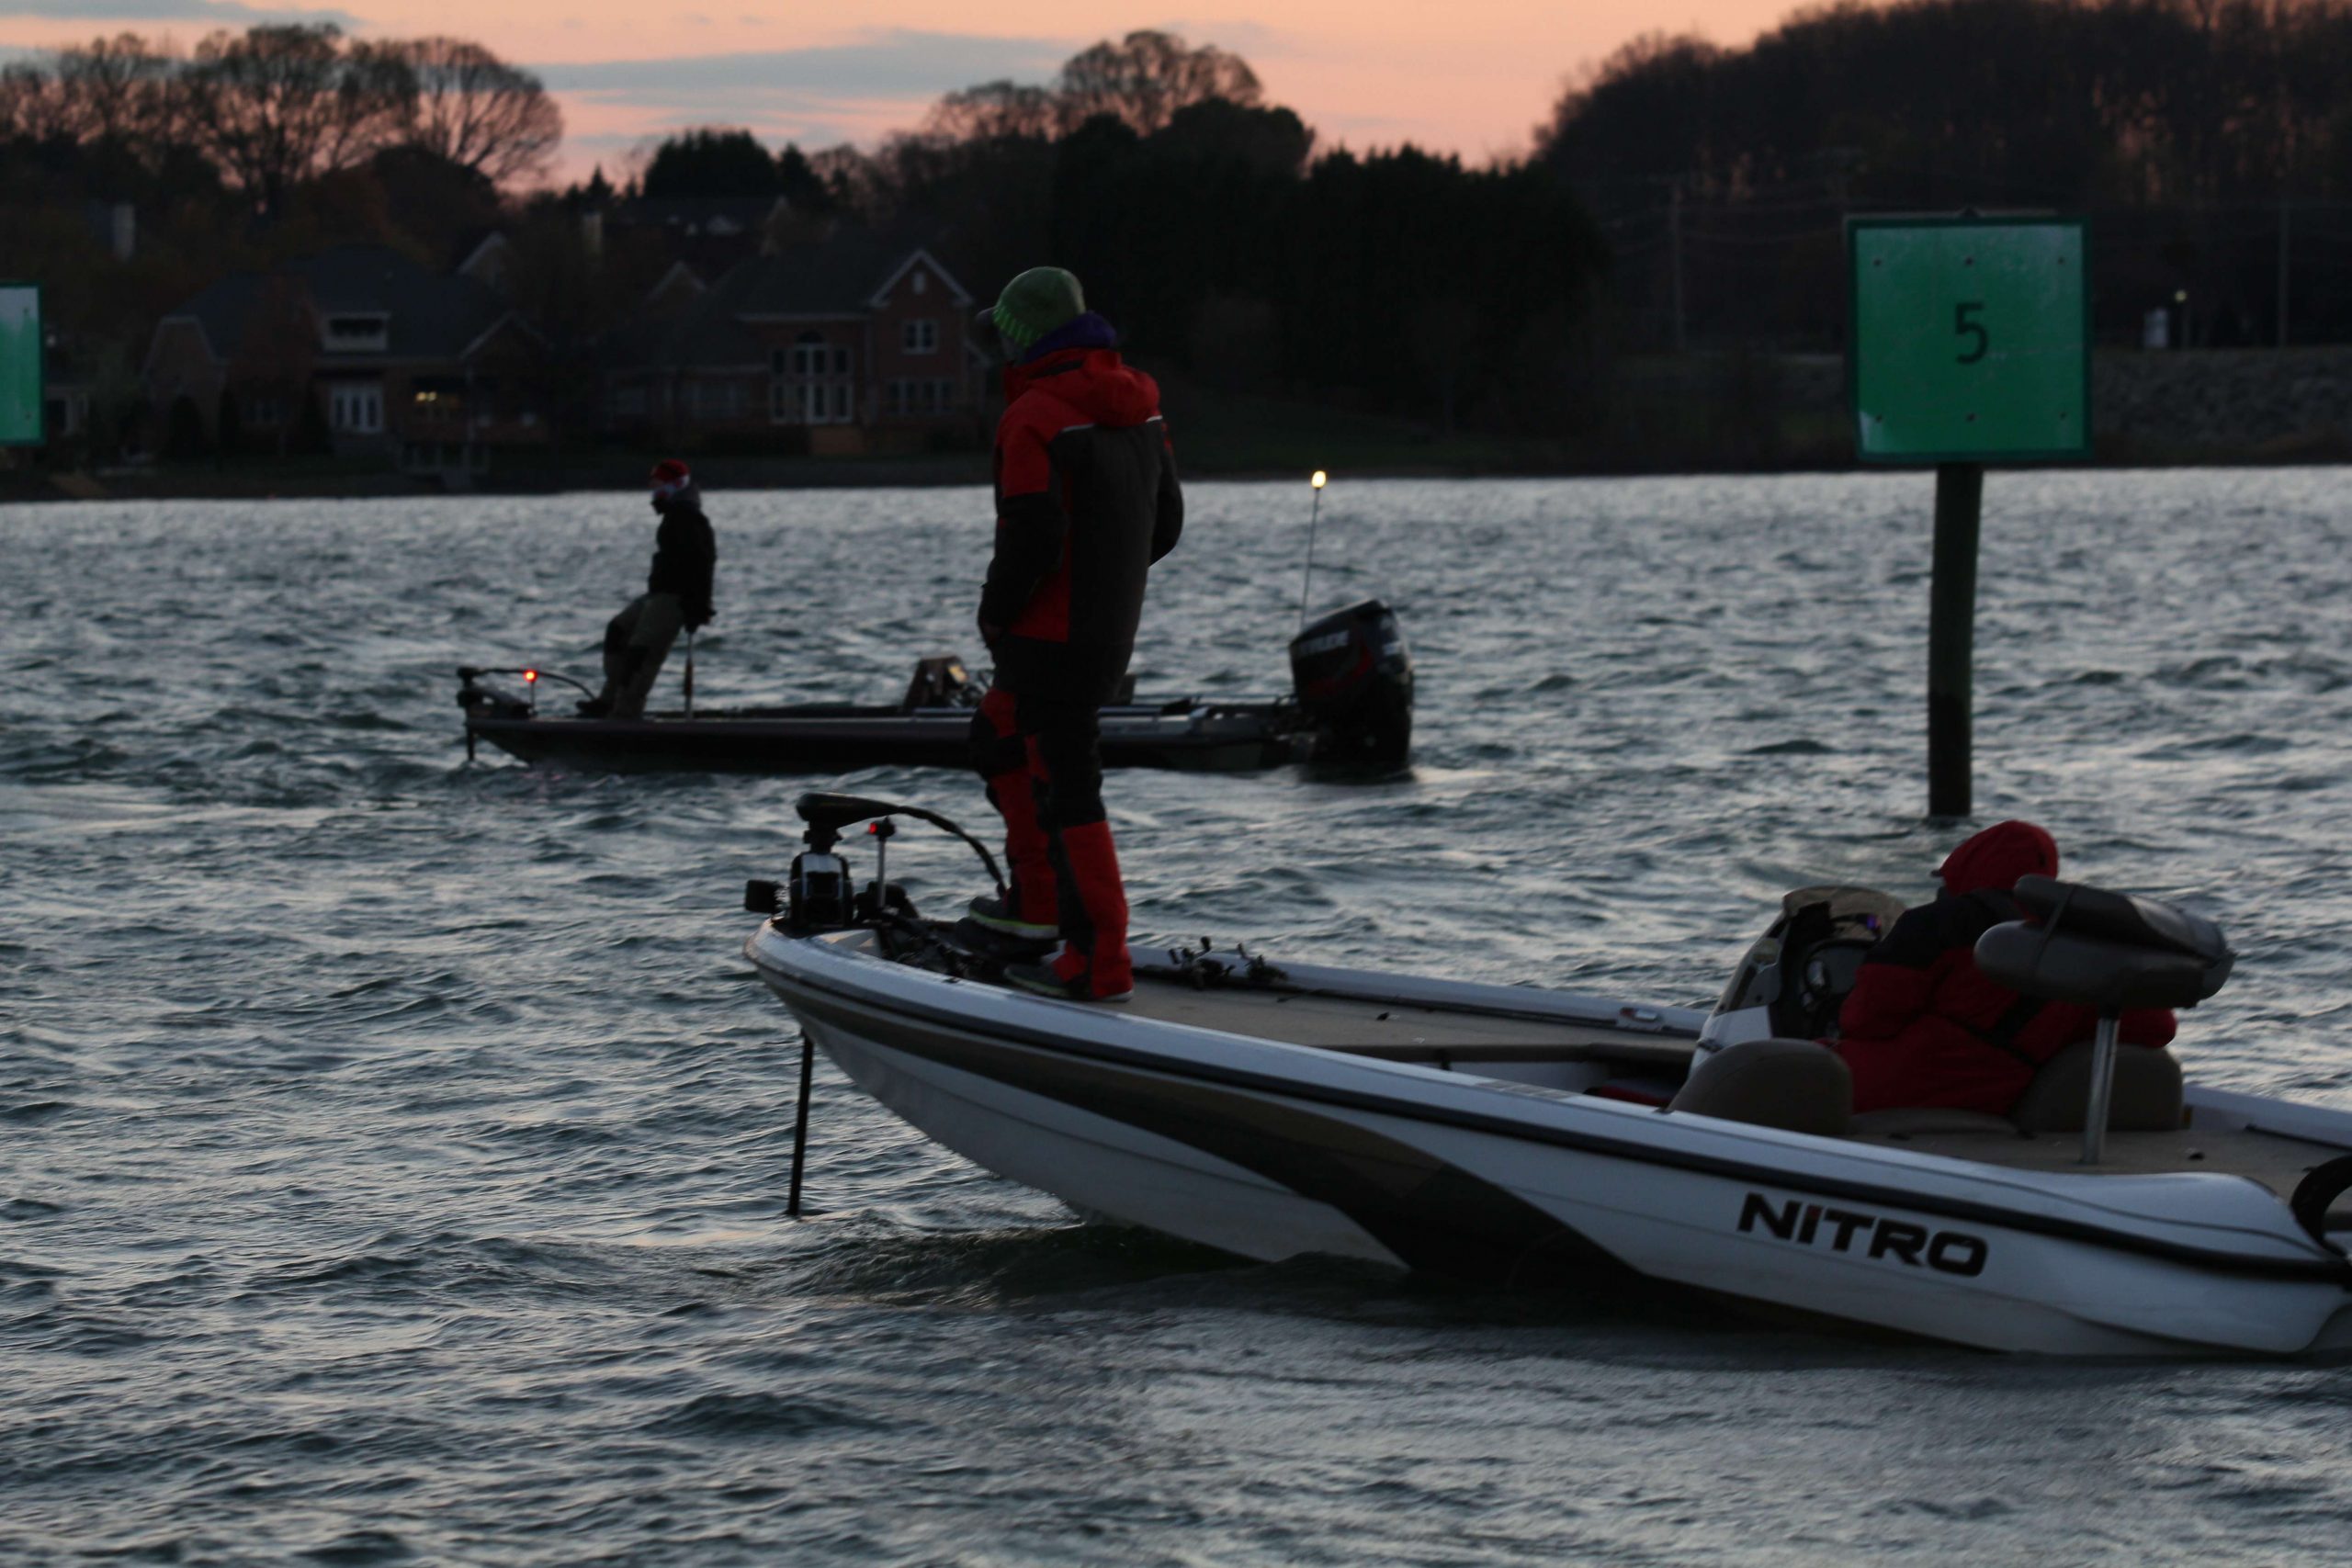 The top 20 collegiate teams return to Lake Norman, battling frigid temperatures and 25-30 mile per hour winds as they take off on the final day of the 2015 Carhartt College Eastern Regional.